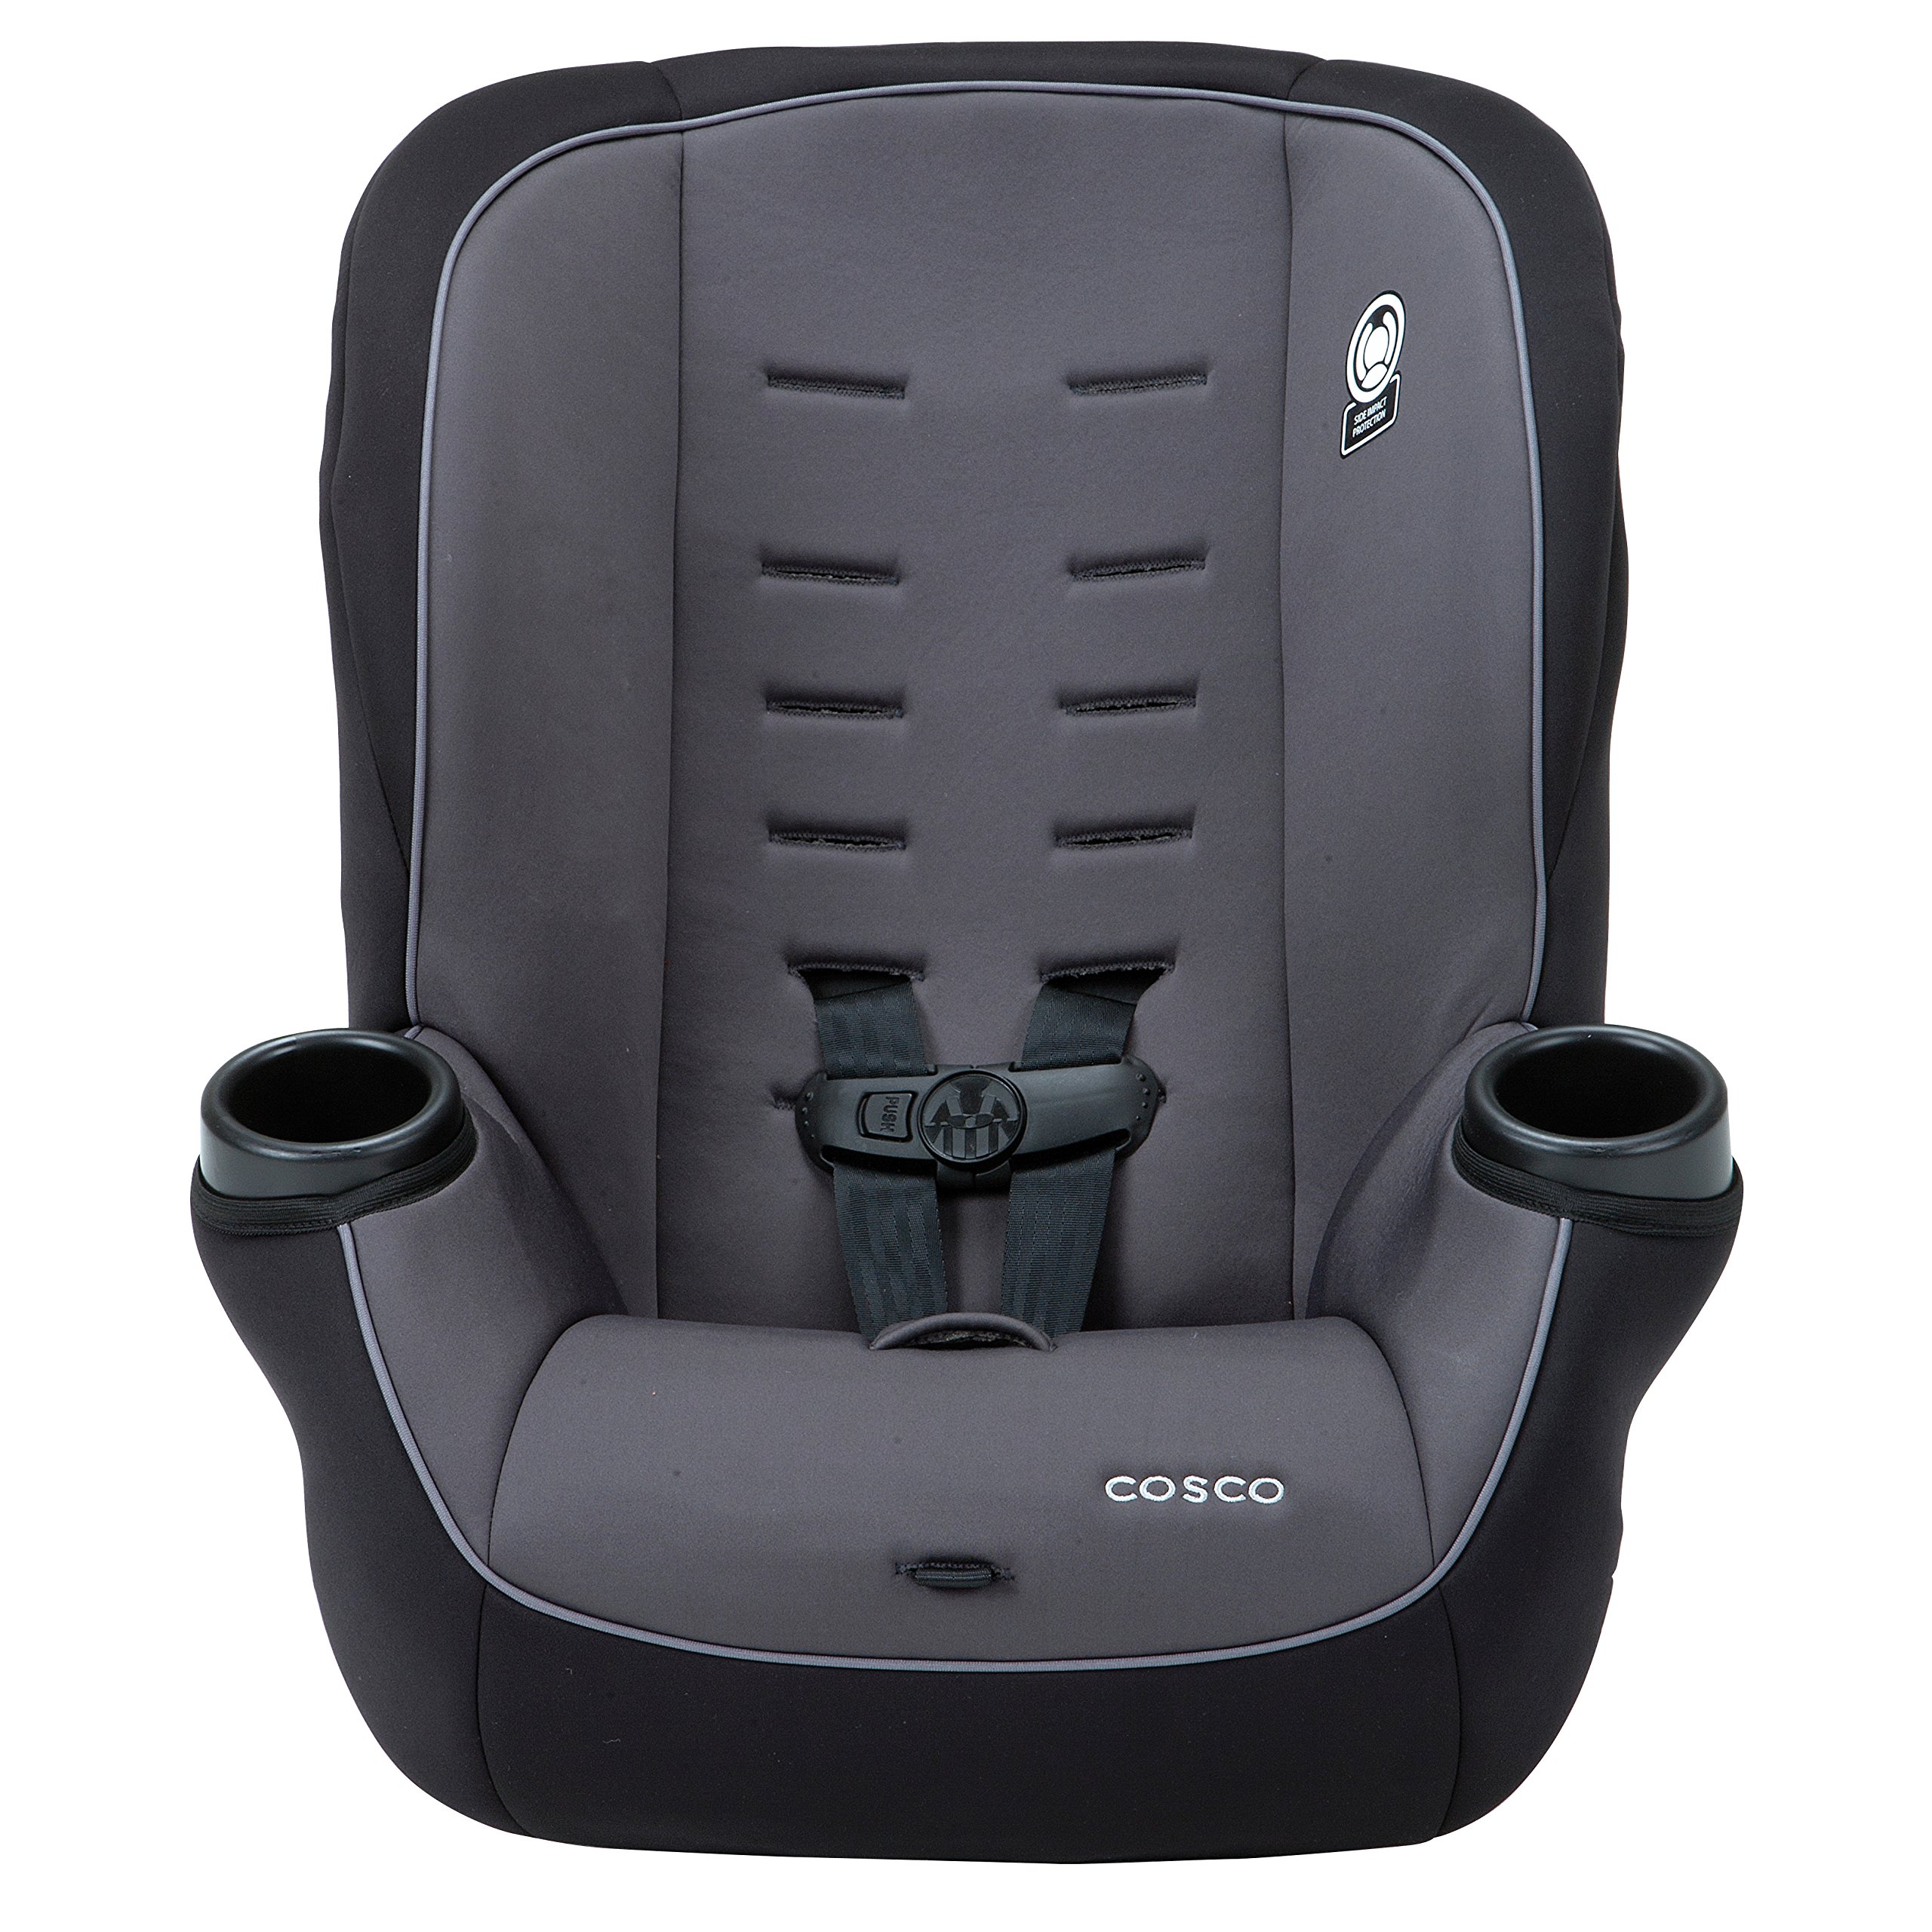 Cosco Onlook 2-In-1 Convertible Car Seat, Rear-Facing 5-40 Pounds And Forward-Facing 22-40 Pounds And Up To 43 Inches, Black Arr